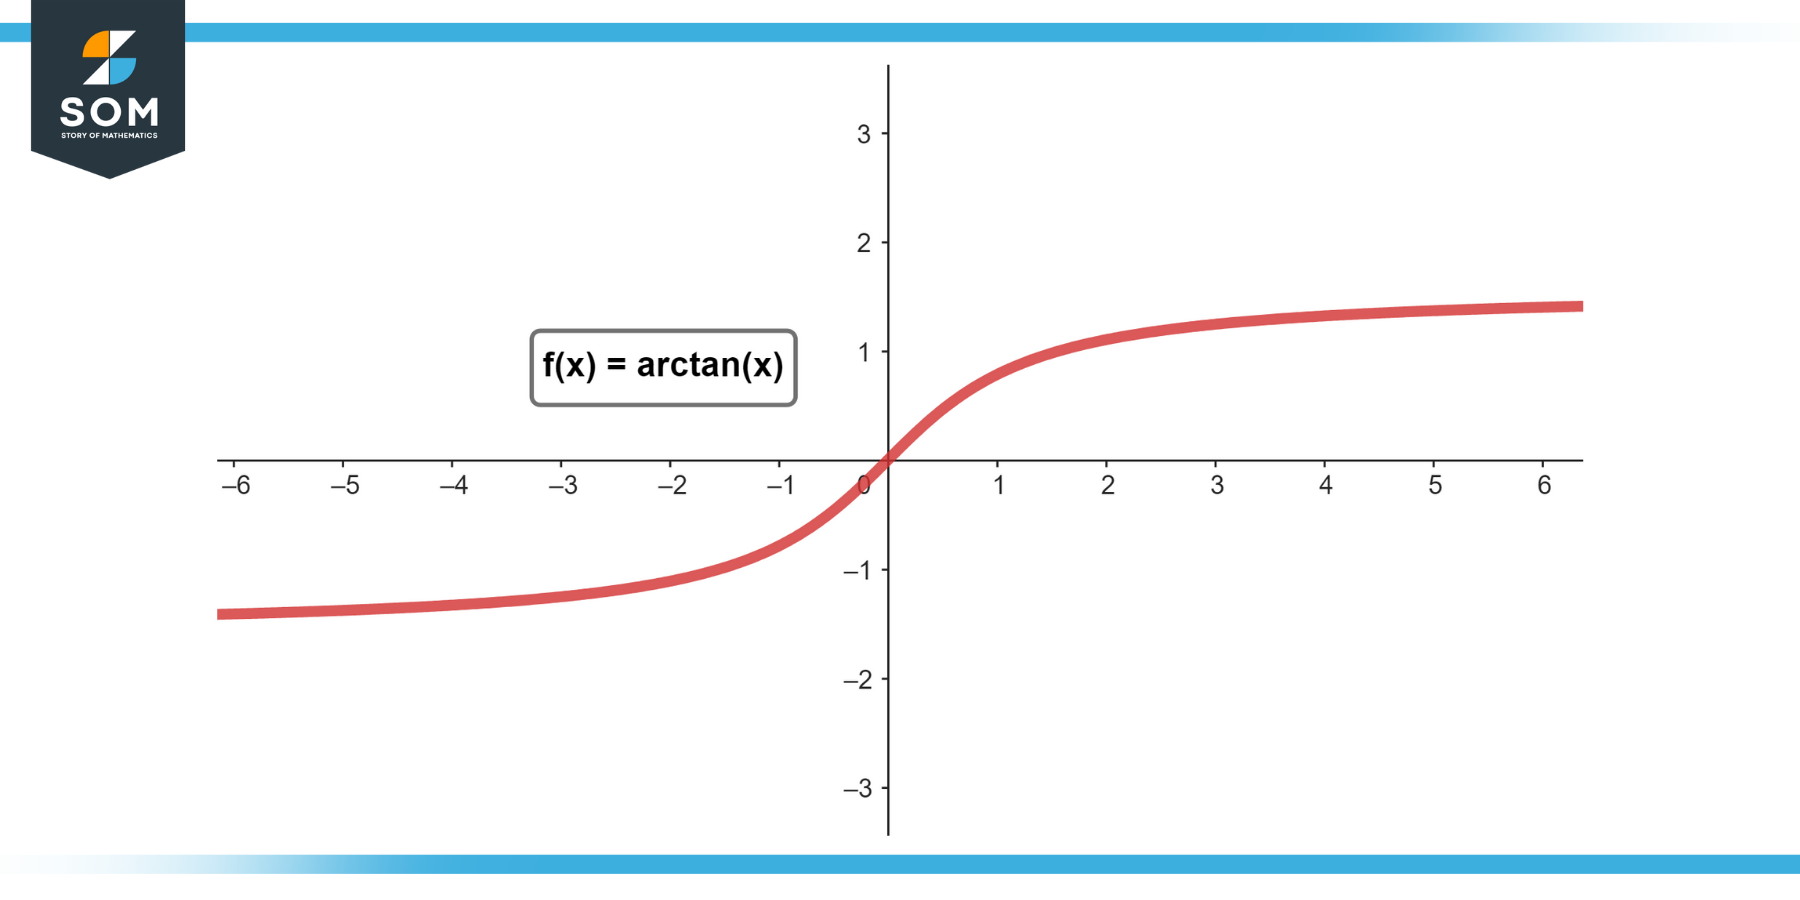 graphical representation of the function